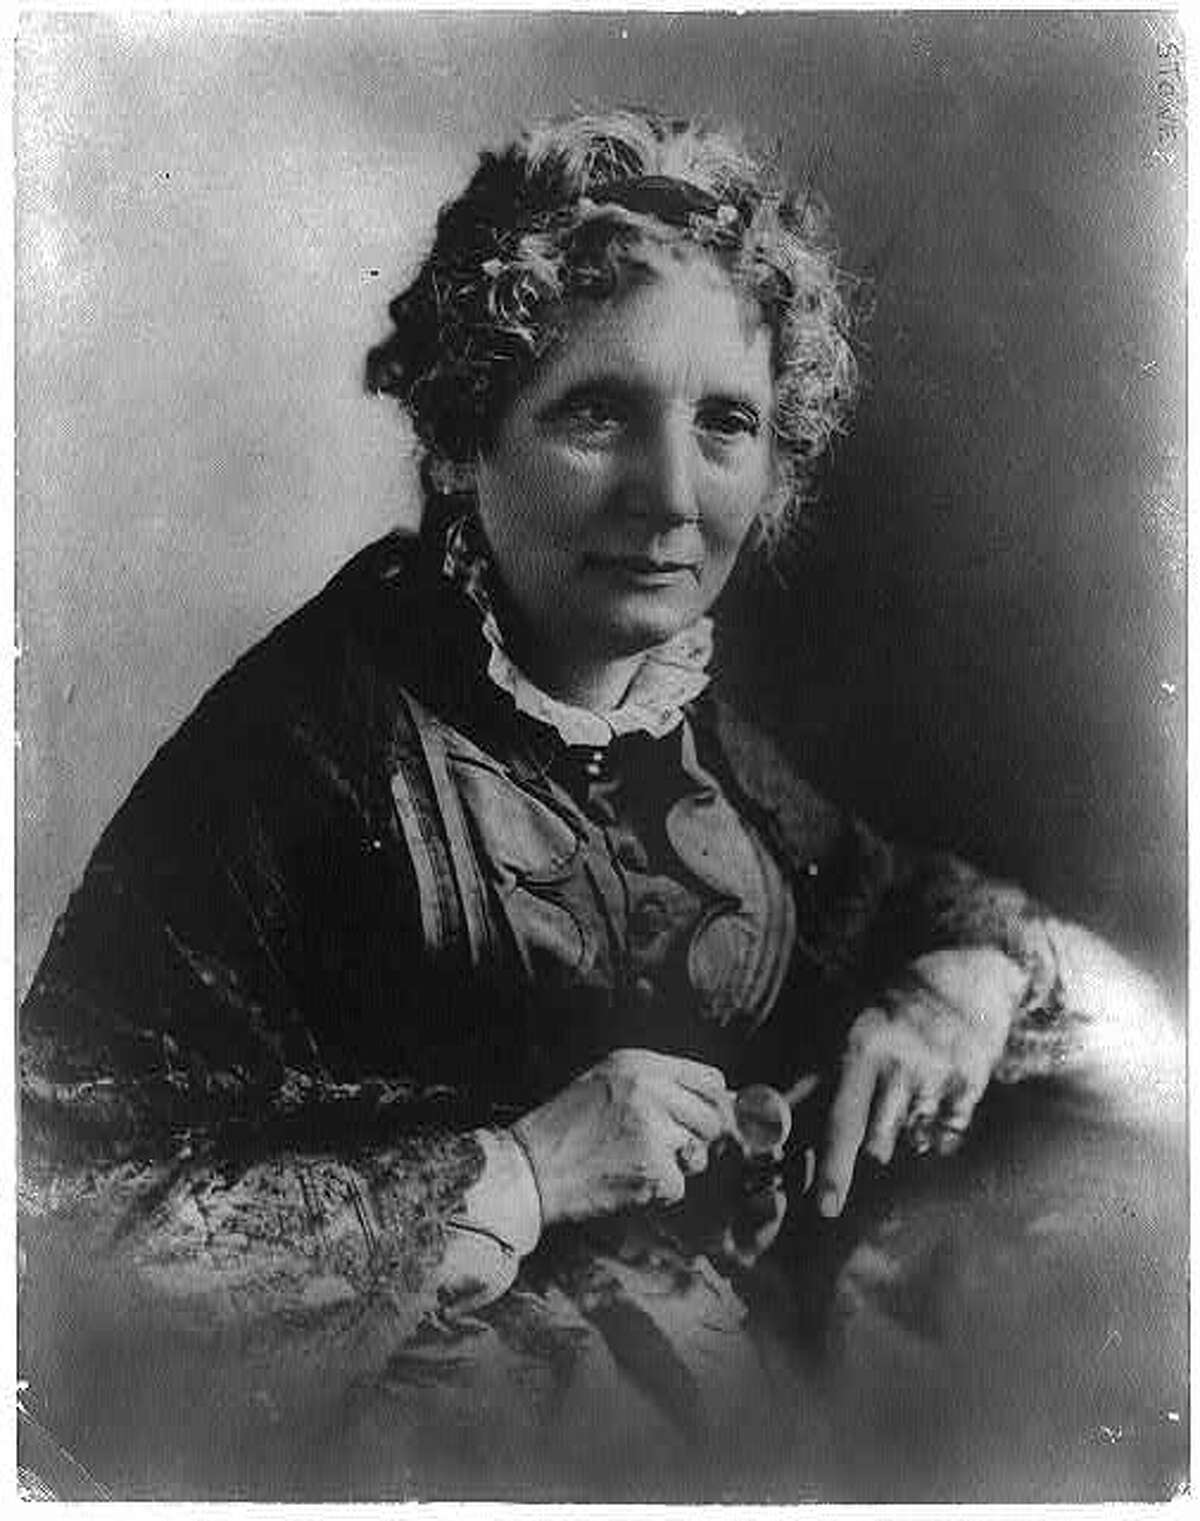 Harriet Beecher Stowe (1811-1896), author of the classic anti-slavery novel, “Uncle Tom’s Cabin,” was born and raised in Litchfield, where she attended Litchfield Female Academy.